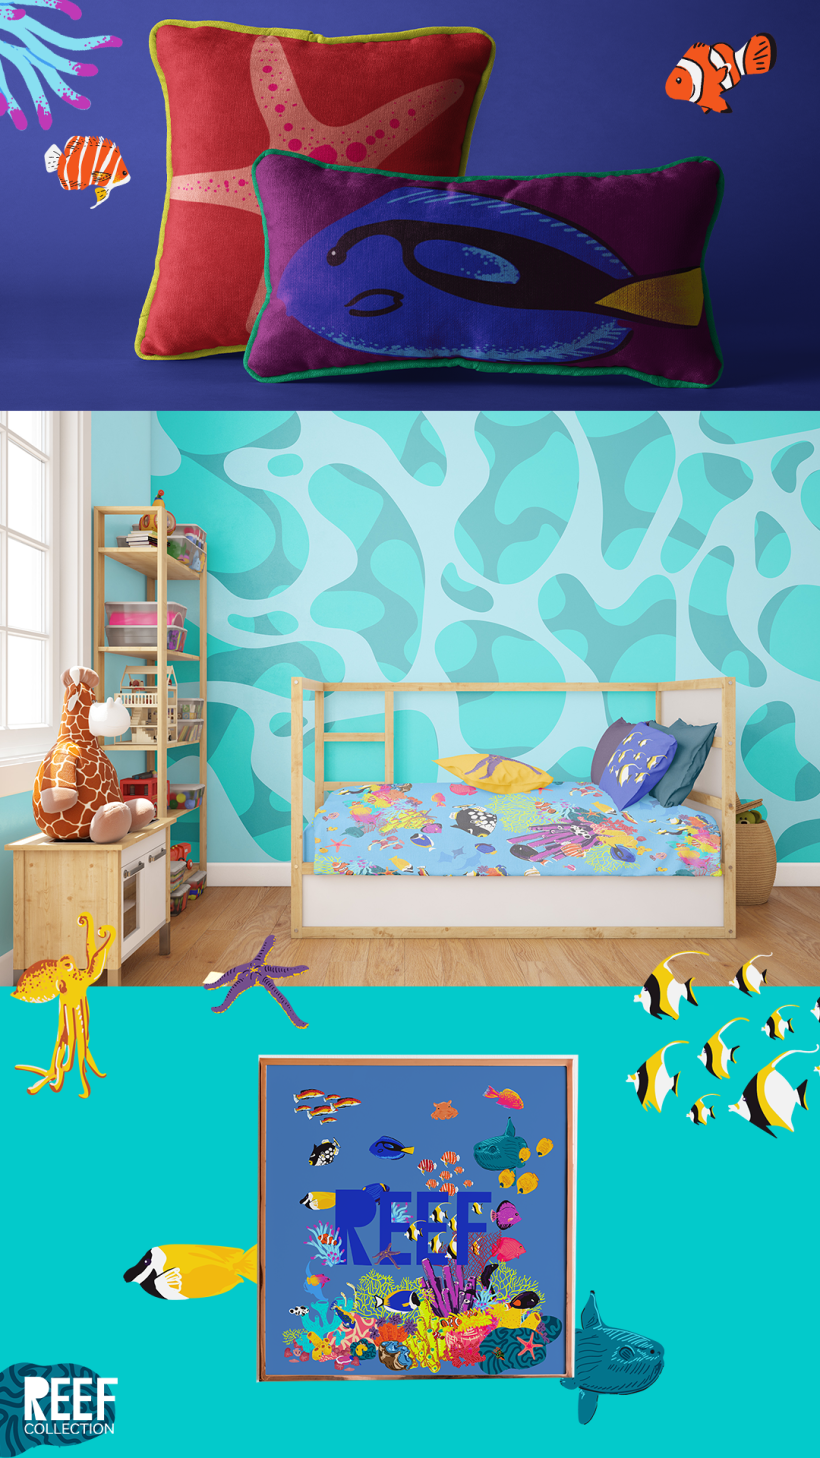 Reef Pattern Collection 5